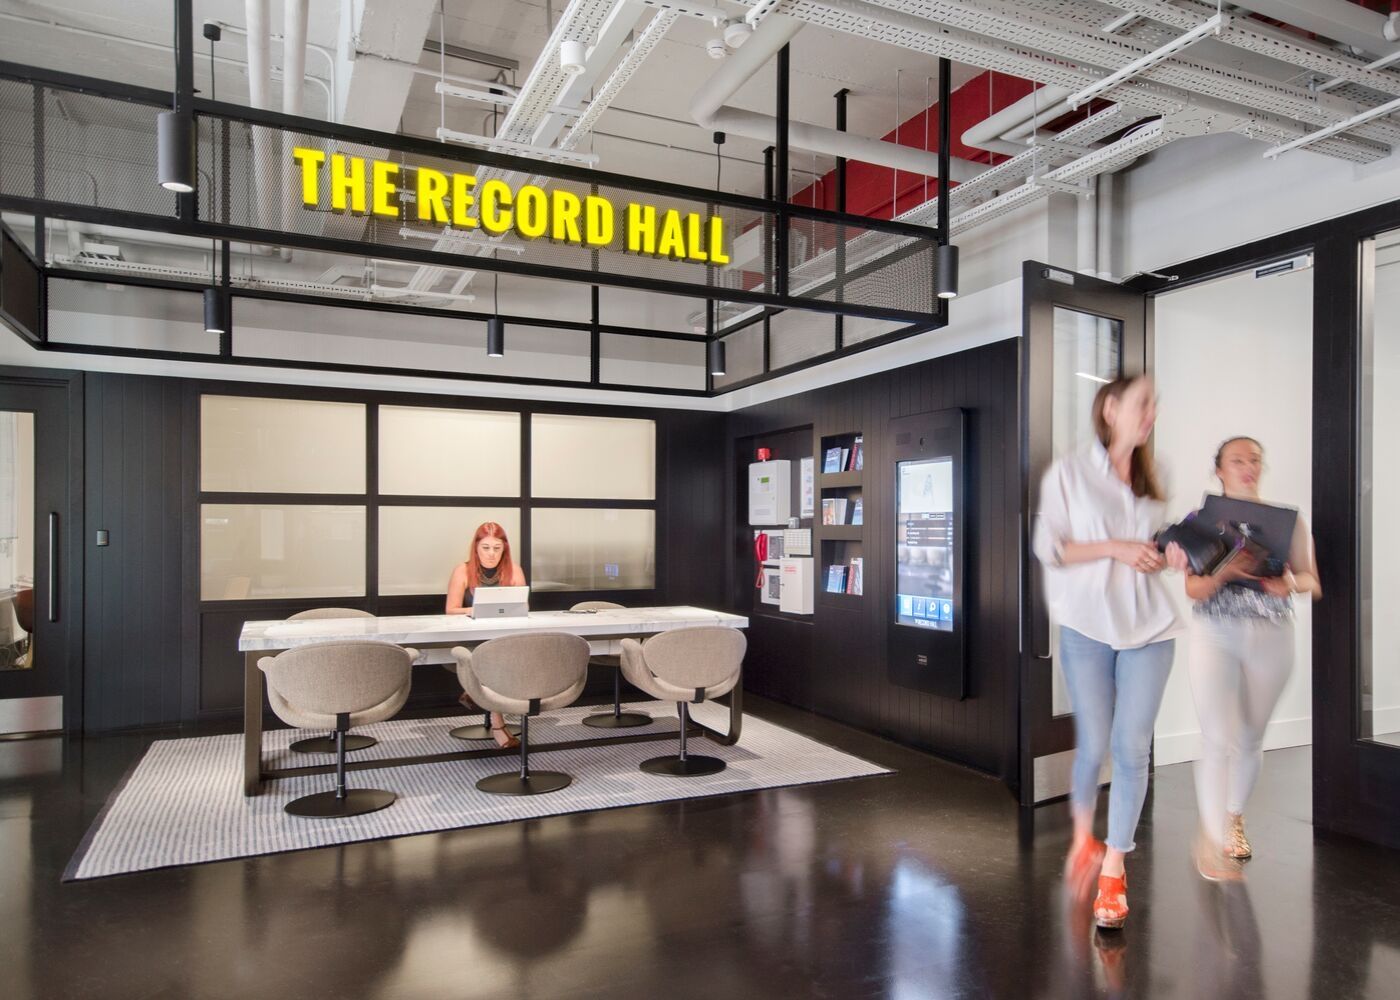  The Record Hall